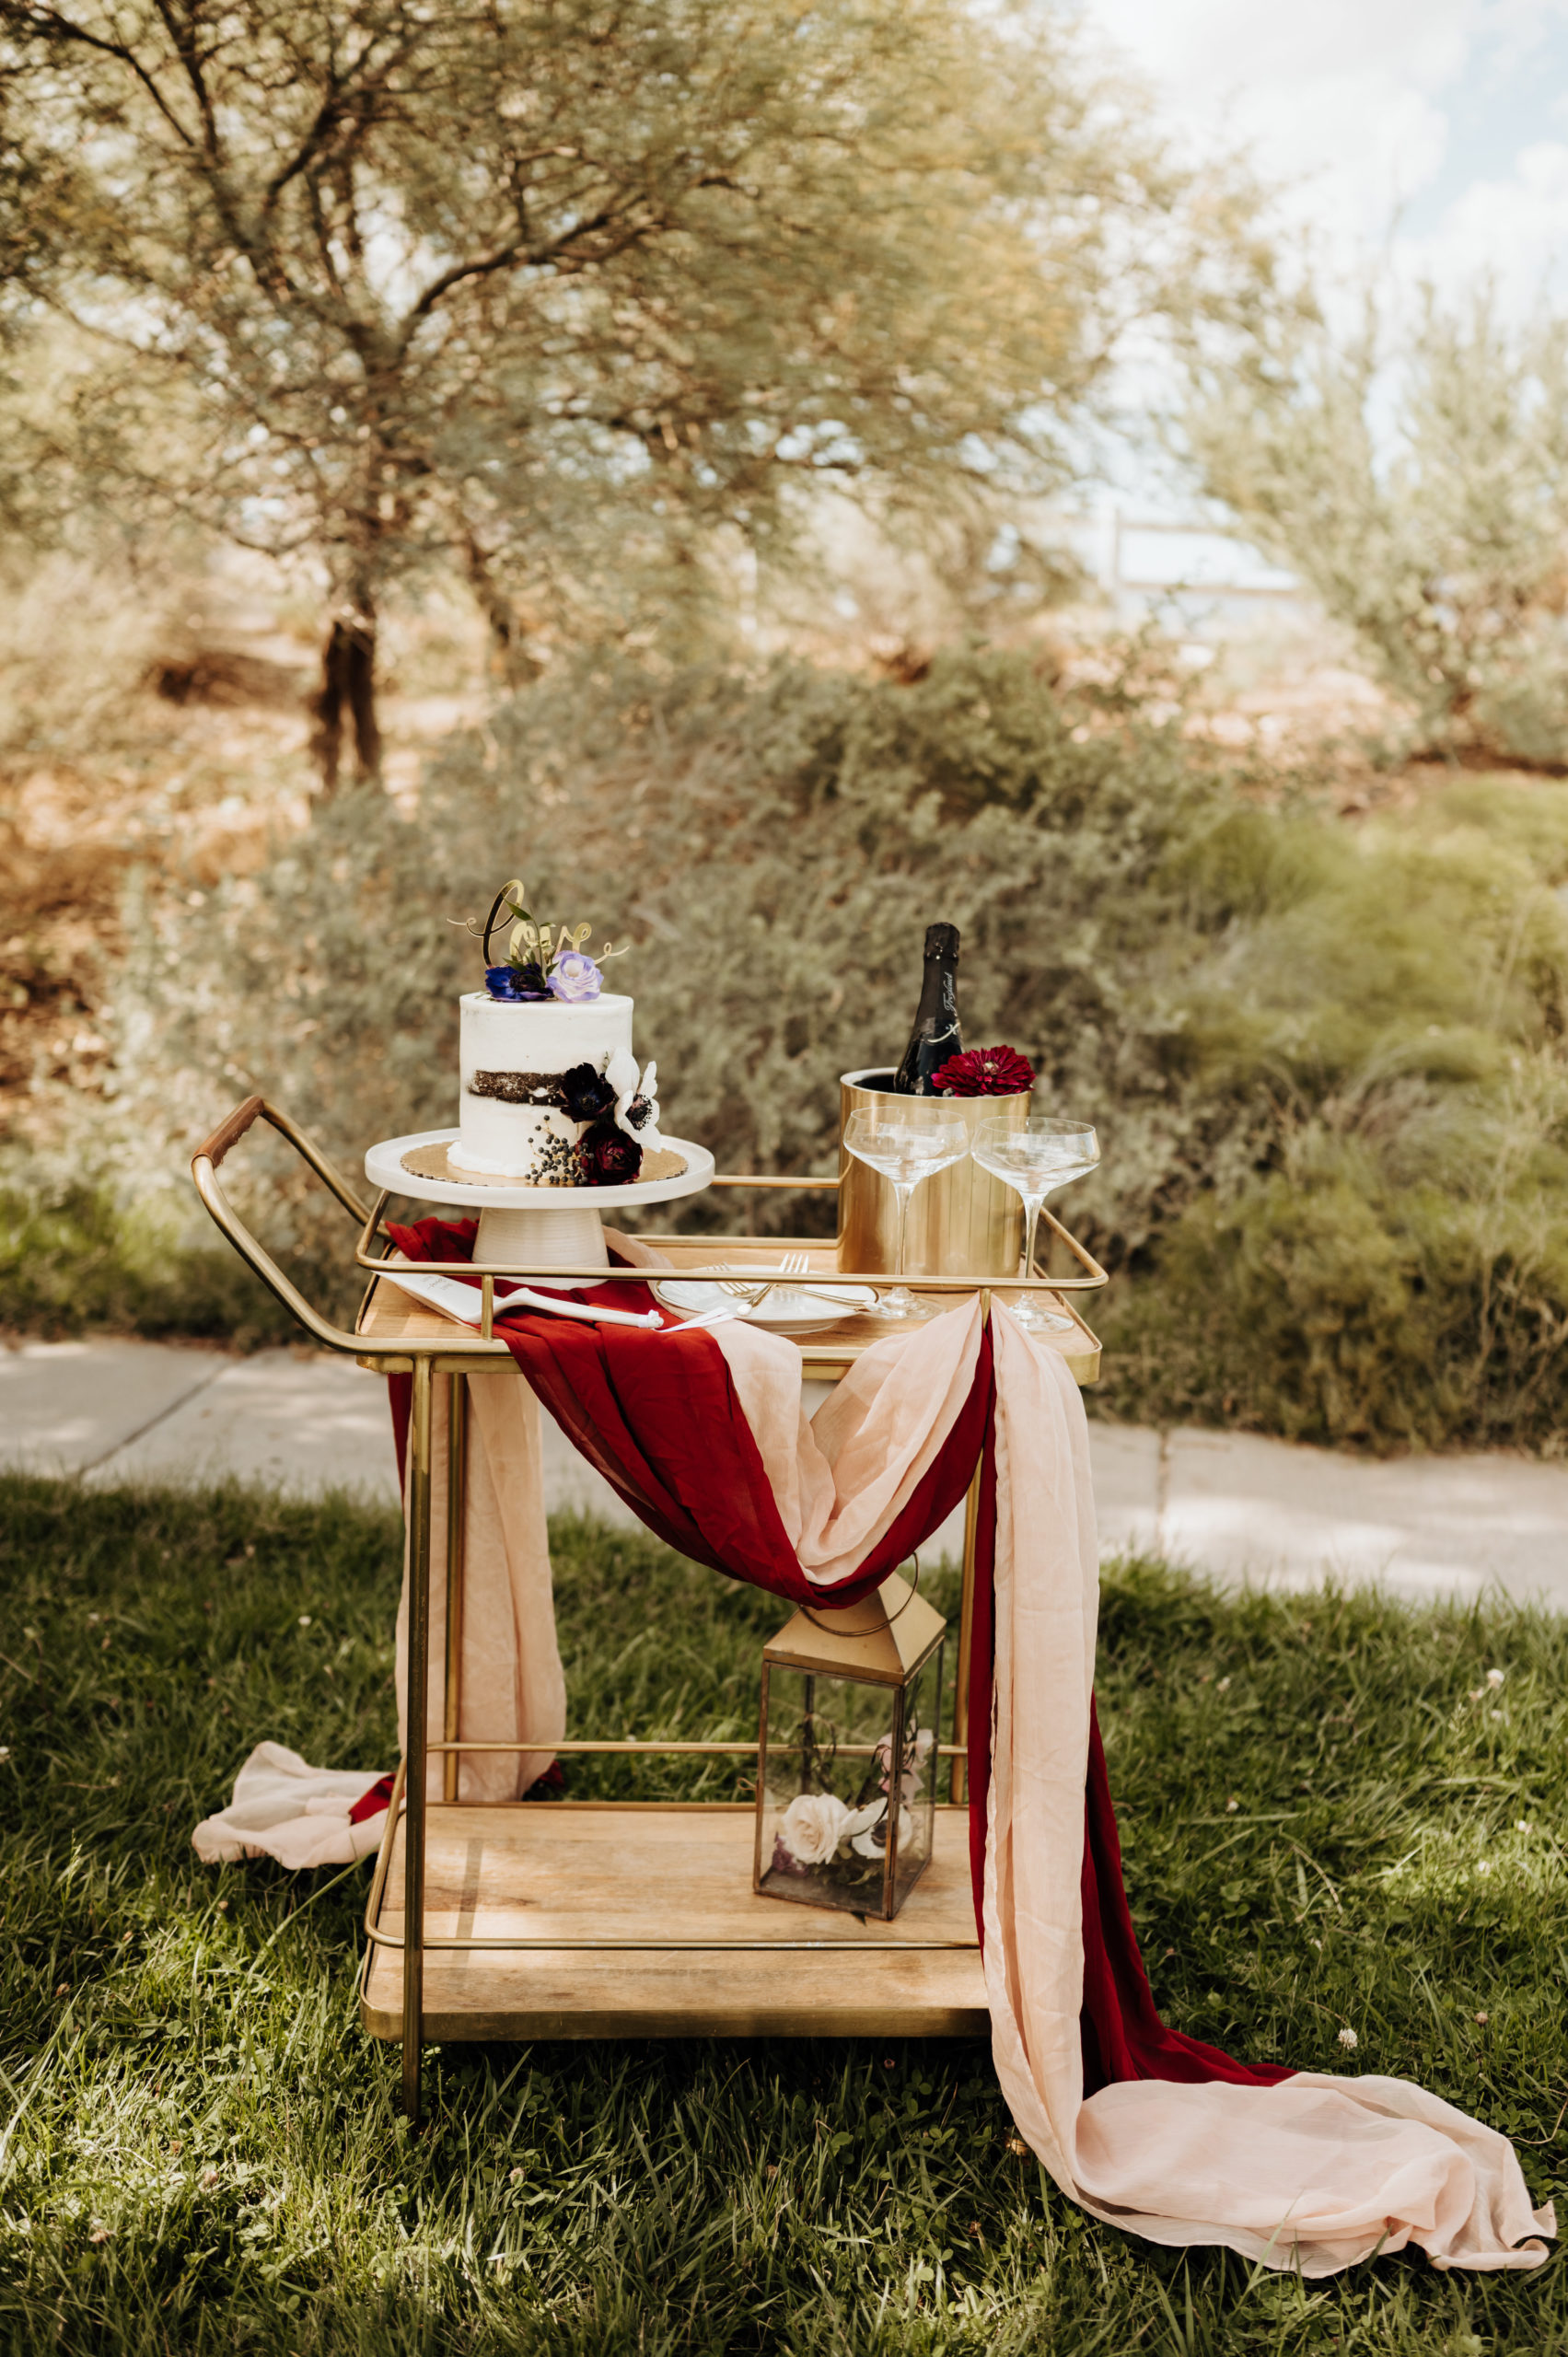 Spring Mountain Ranch Wedding & Elopement. Wedding cake and wine placed on gold tray cart.